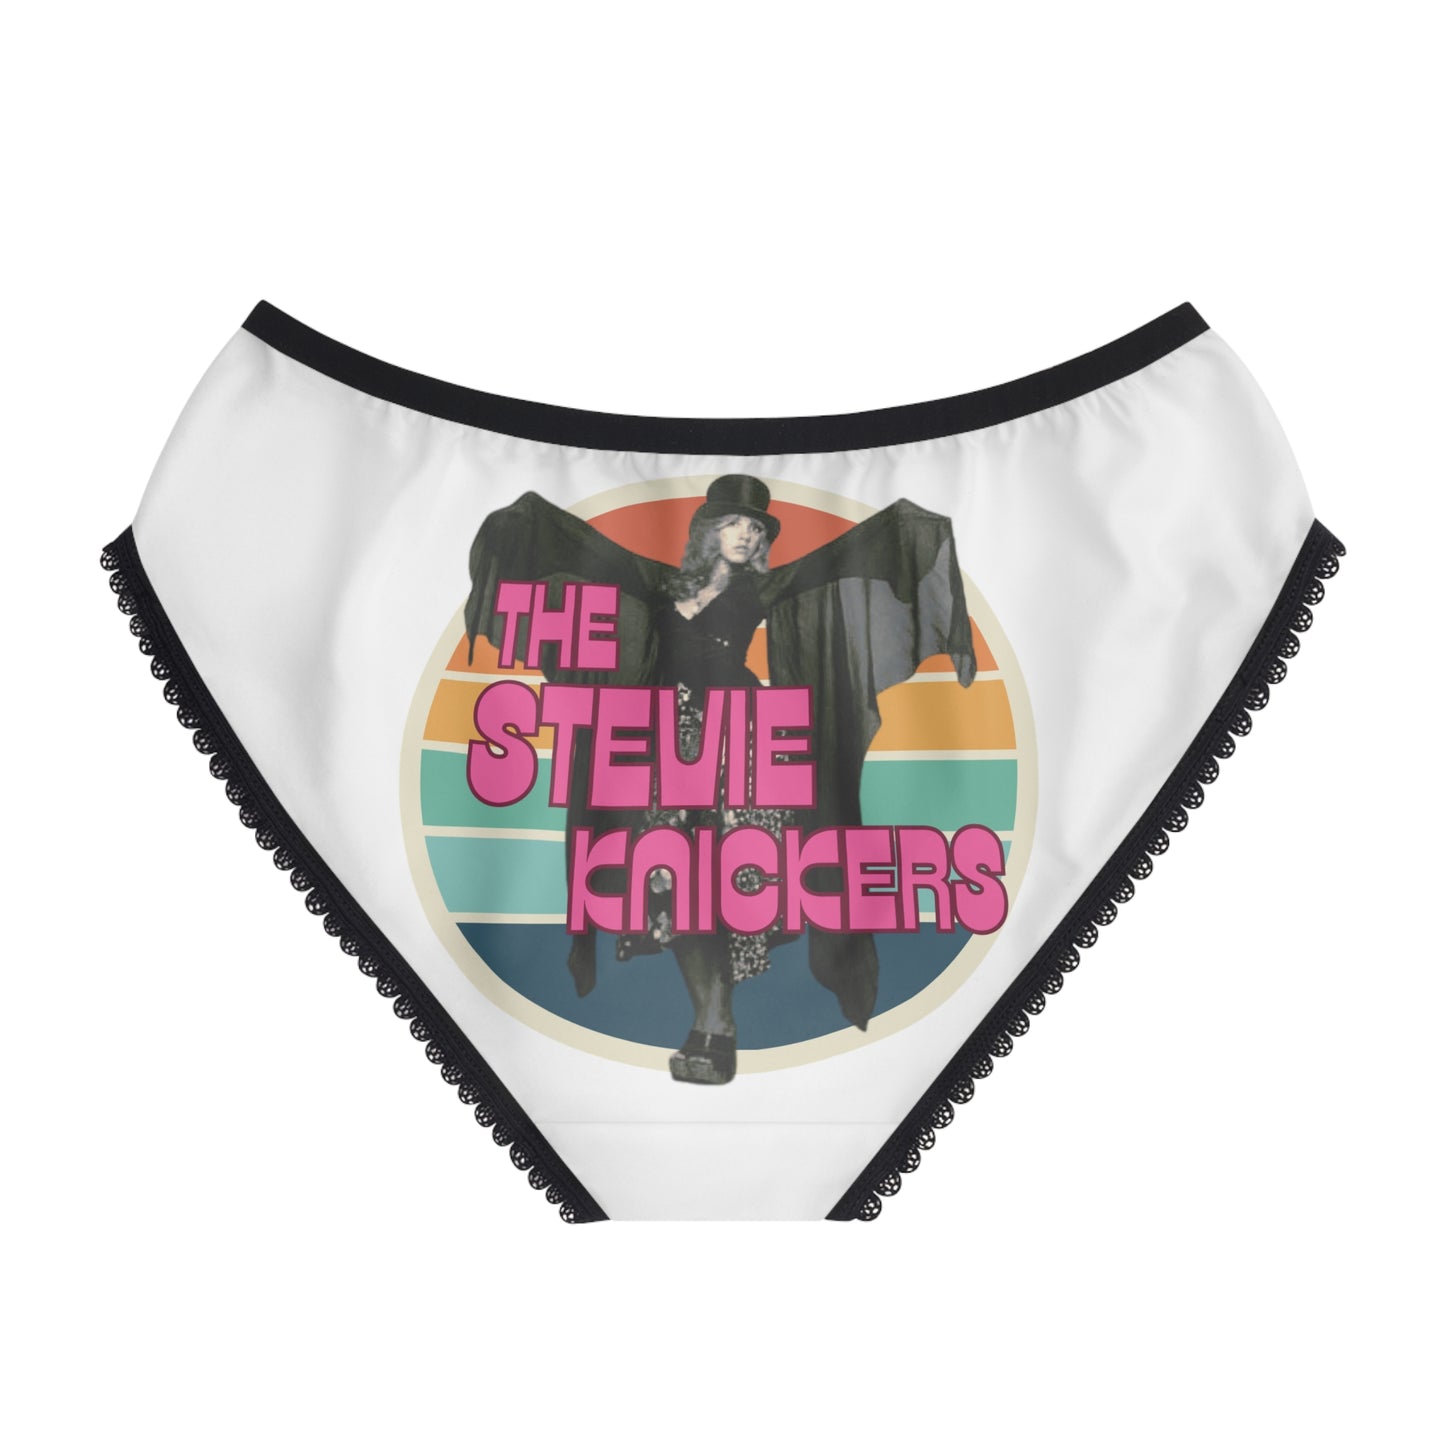 The Stevie kNICKers